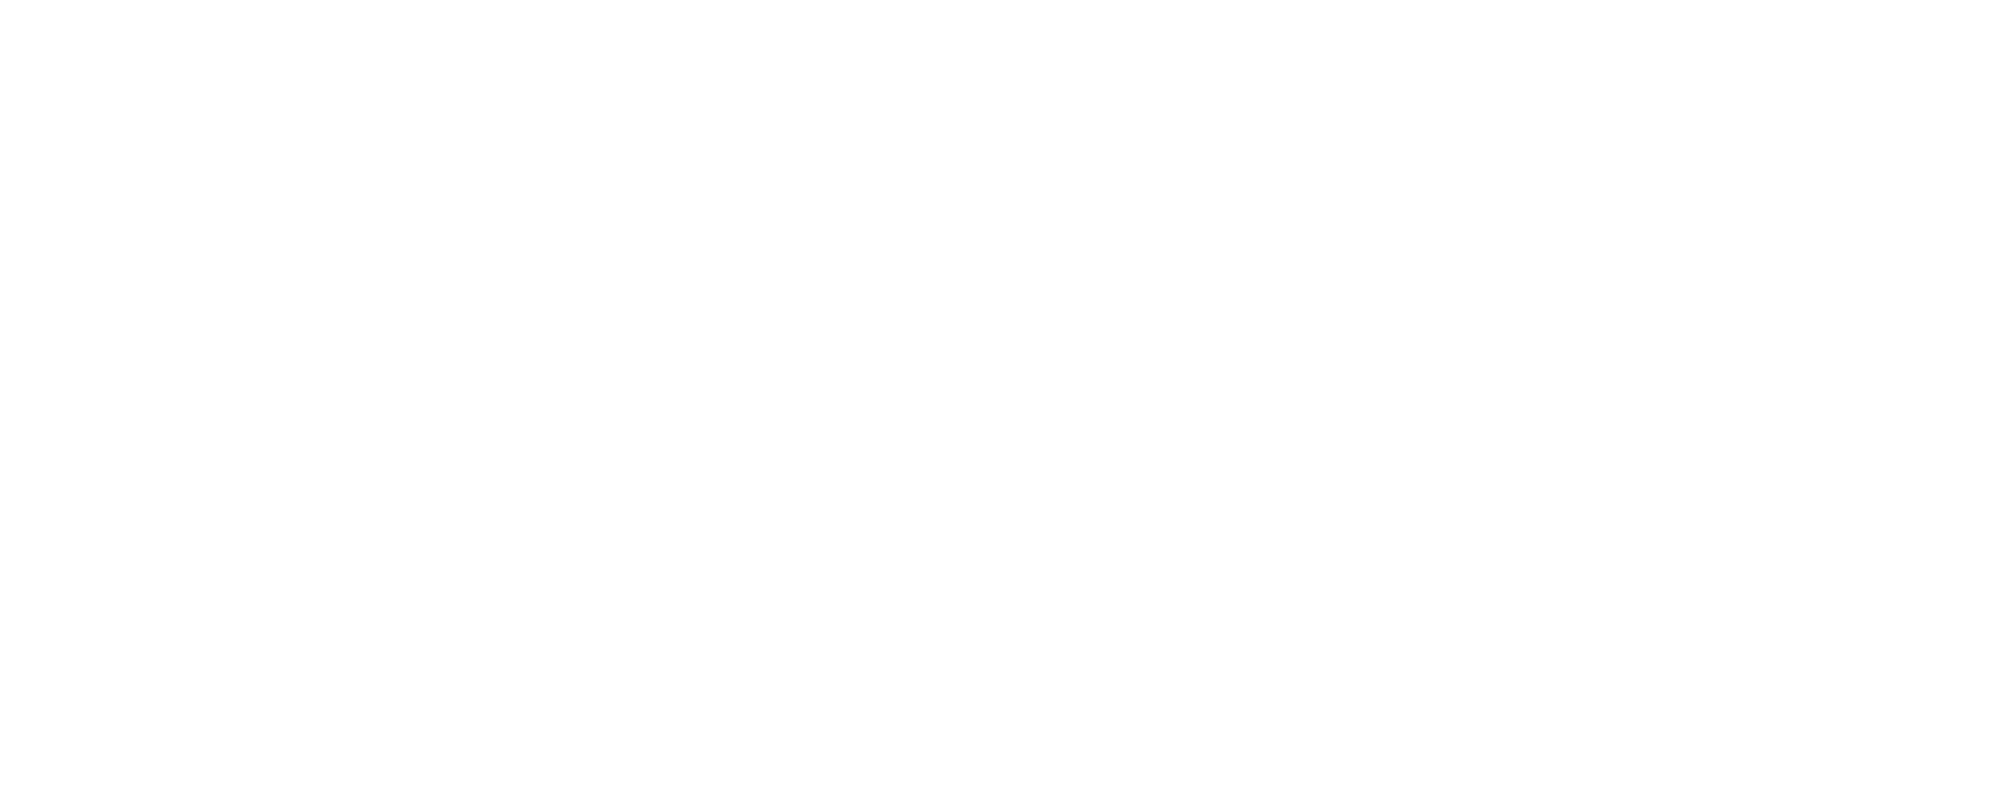 Dr. Koushik P. Agte | Physiotherapist & Chiropractor | Physionova Holistic Care Clinic in Sinhagad road |